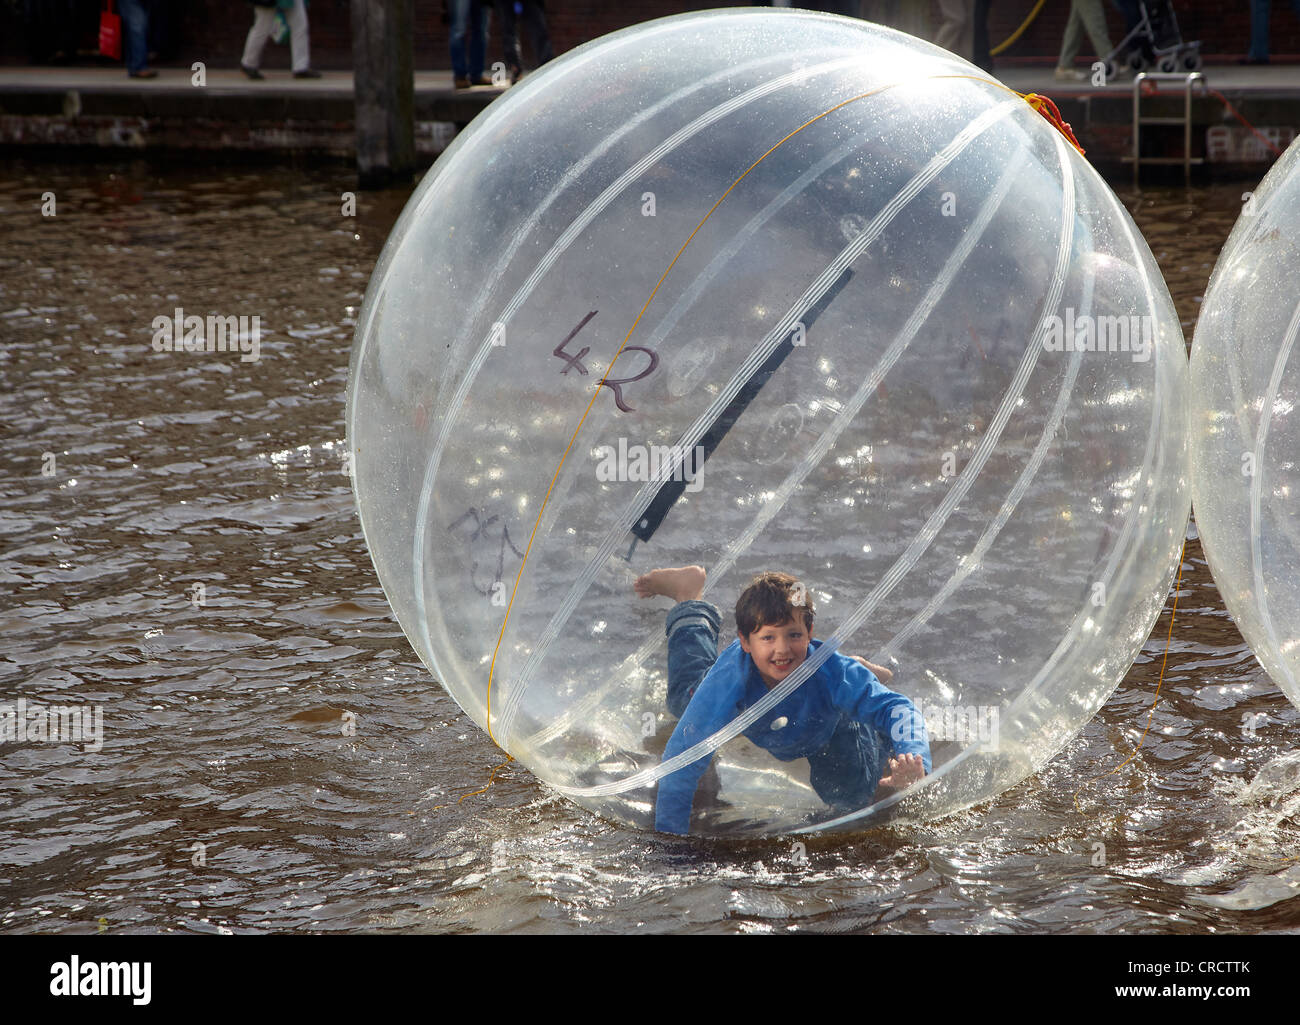 Children in an air ball on the water, Emden, Lower Saxony, Germany, Europe Stock Photo